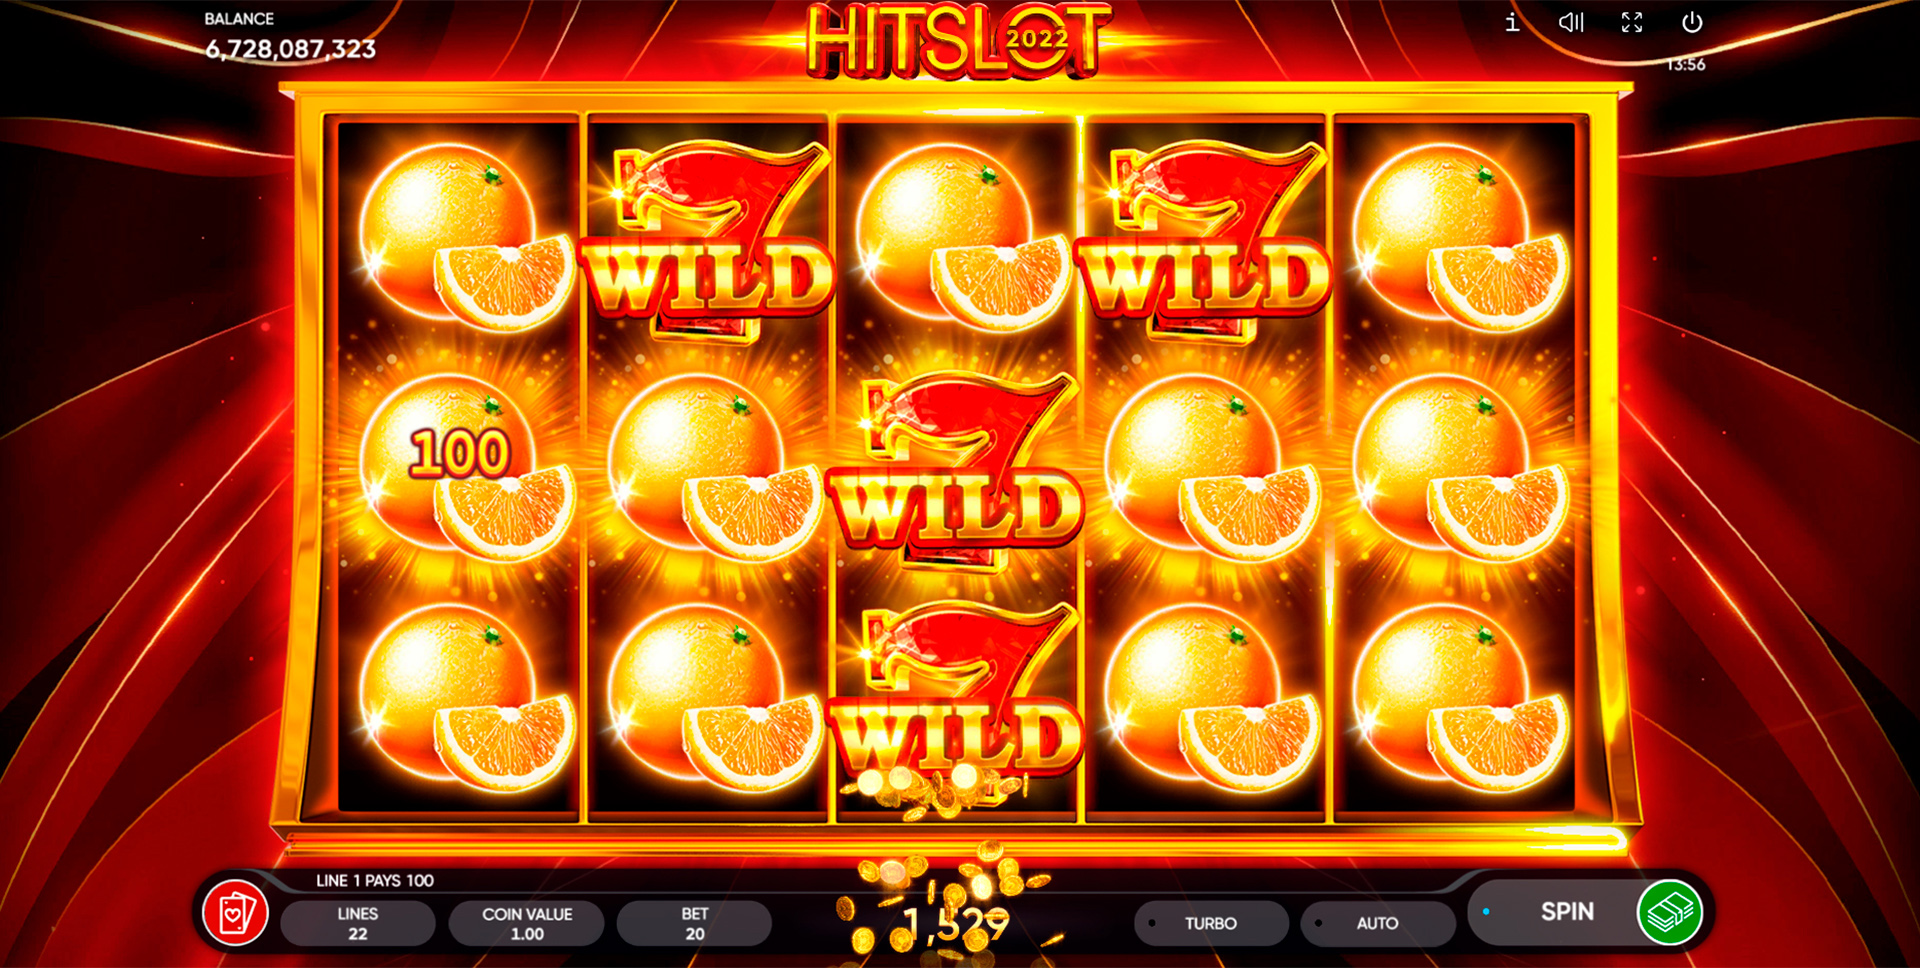 Win Money in 2022 Hit Slot Free Slot Game by Endorphina